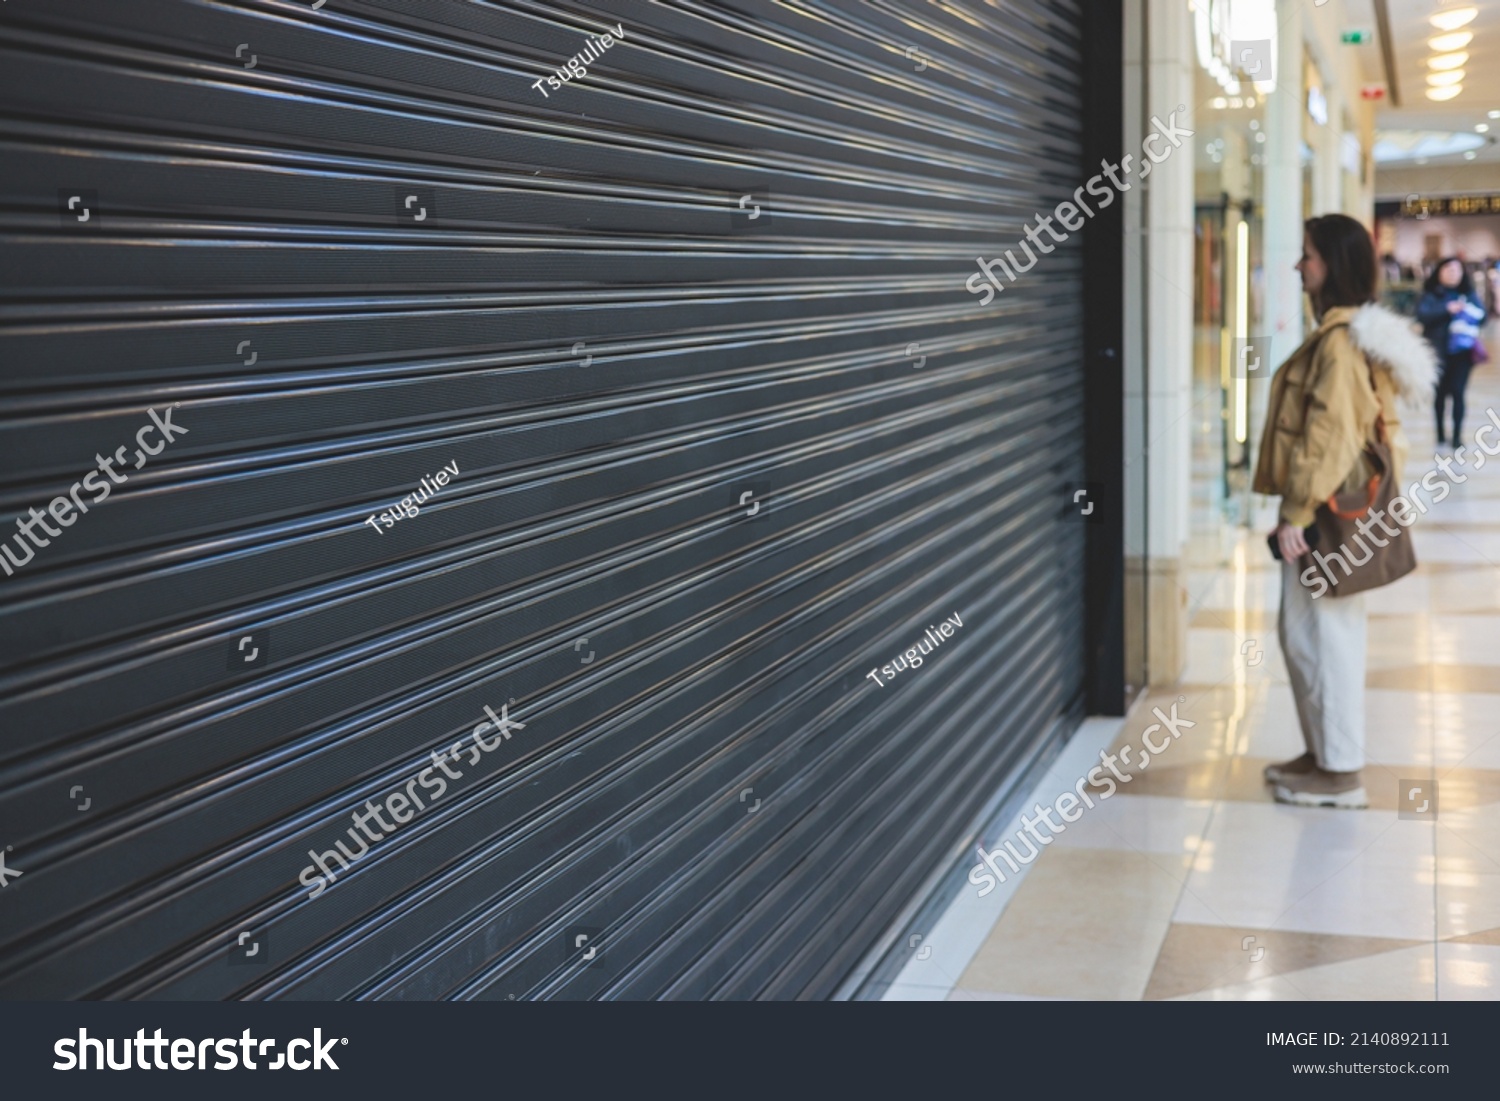 Stores show case in shopping mall closed due to sanctions, boycott and embargo, mass market cloth shops work stoppage with closed storefronts, retail business suspension and brands leaving market #2140892111